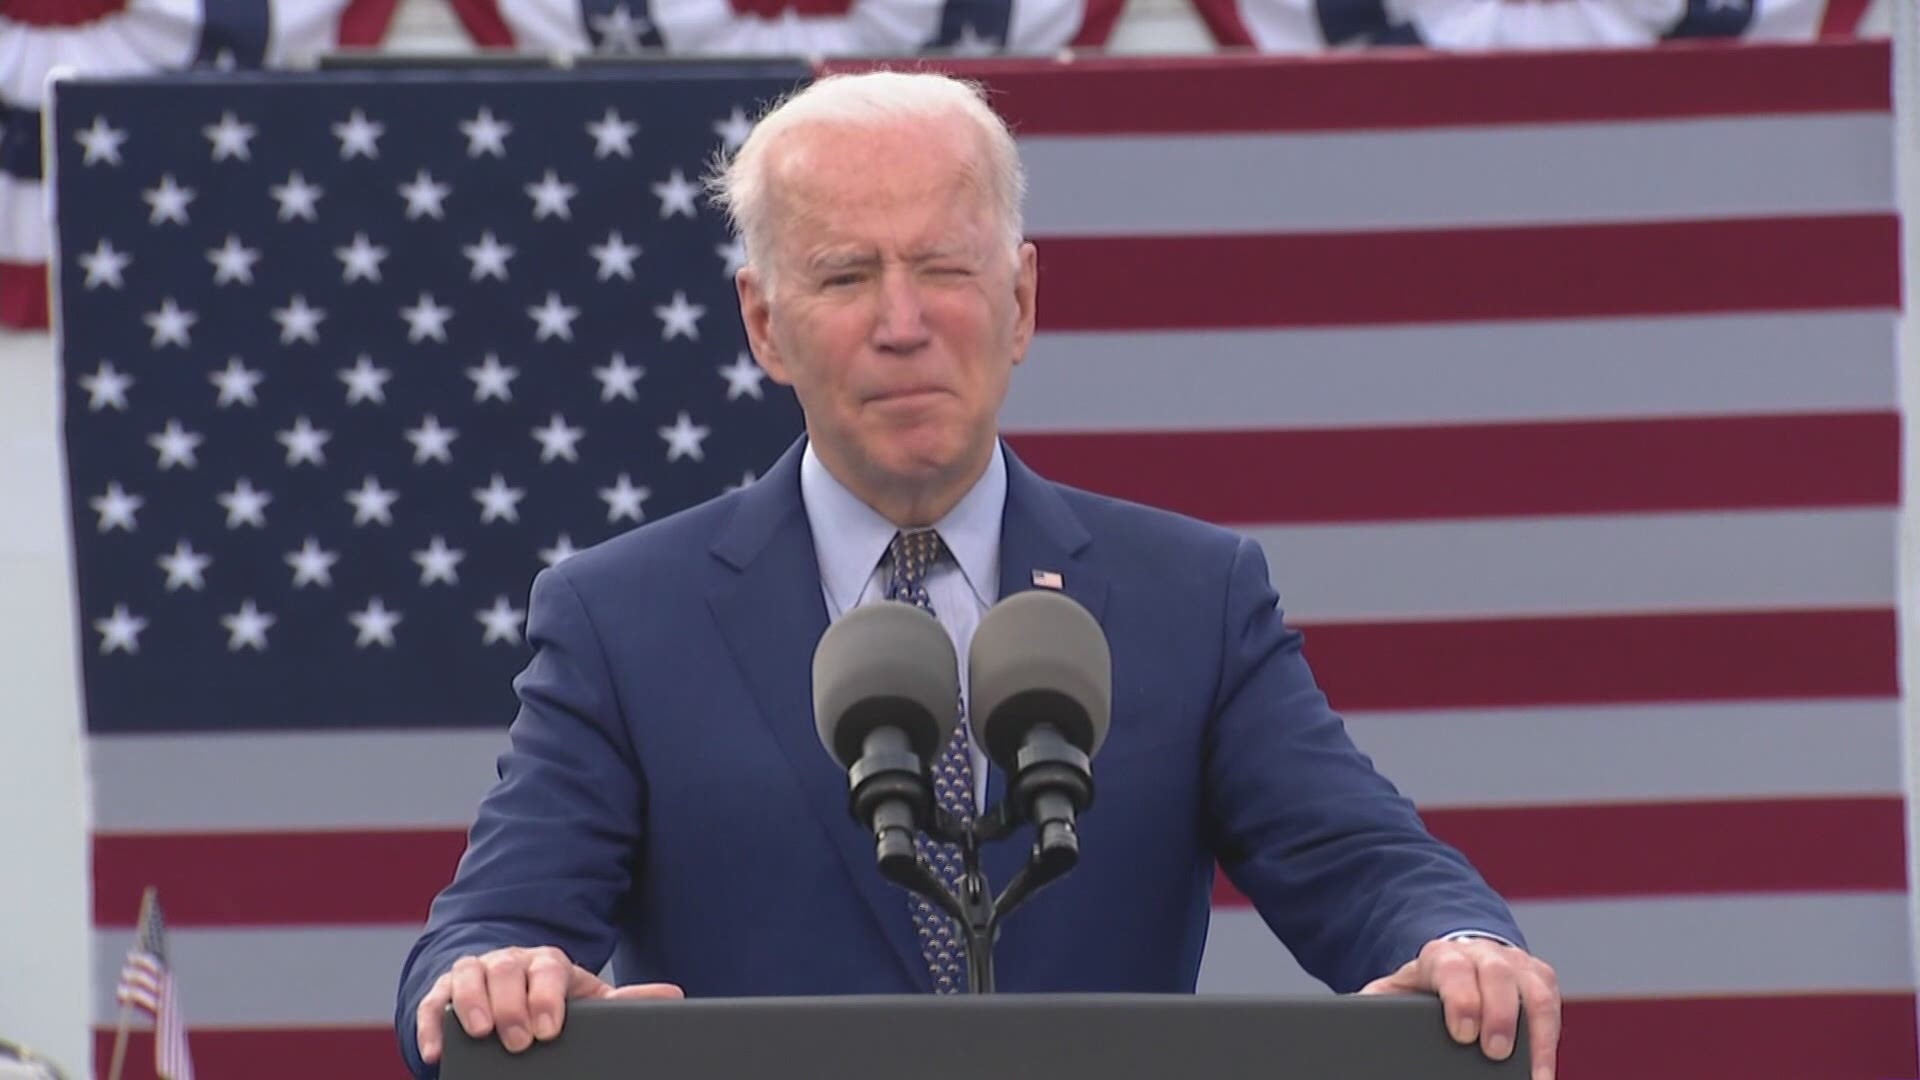 President Joe Biden is scheduled to visit New Orleans on Thursday as part of his tour pushing for his infrastructure plan.